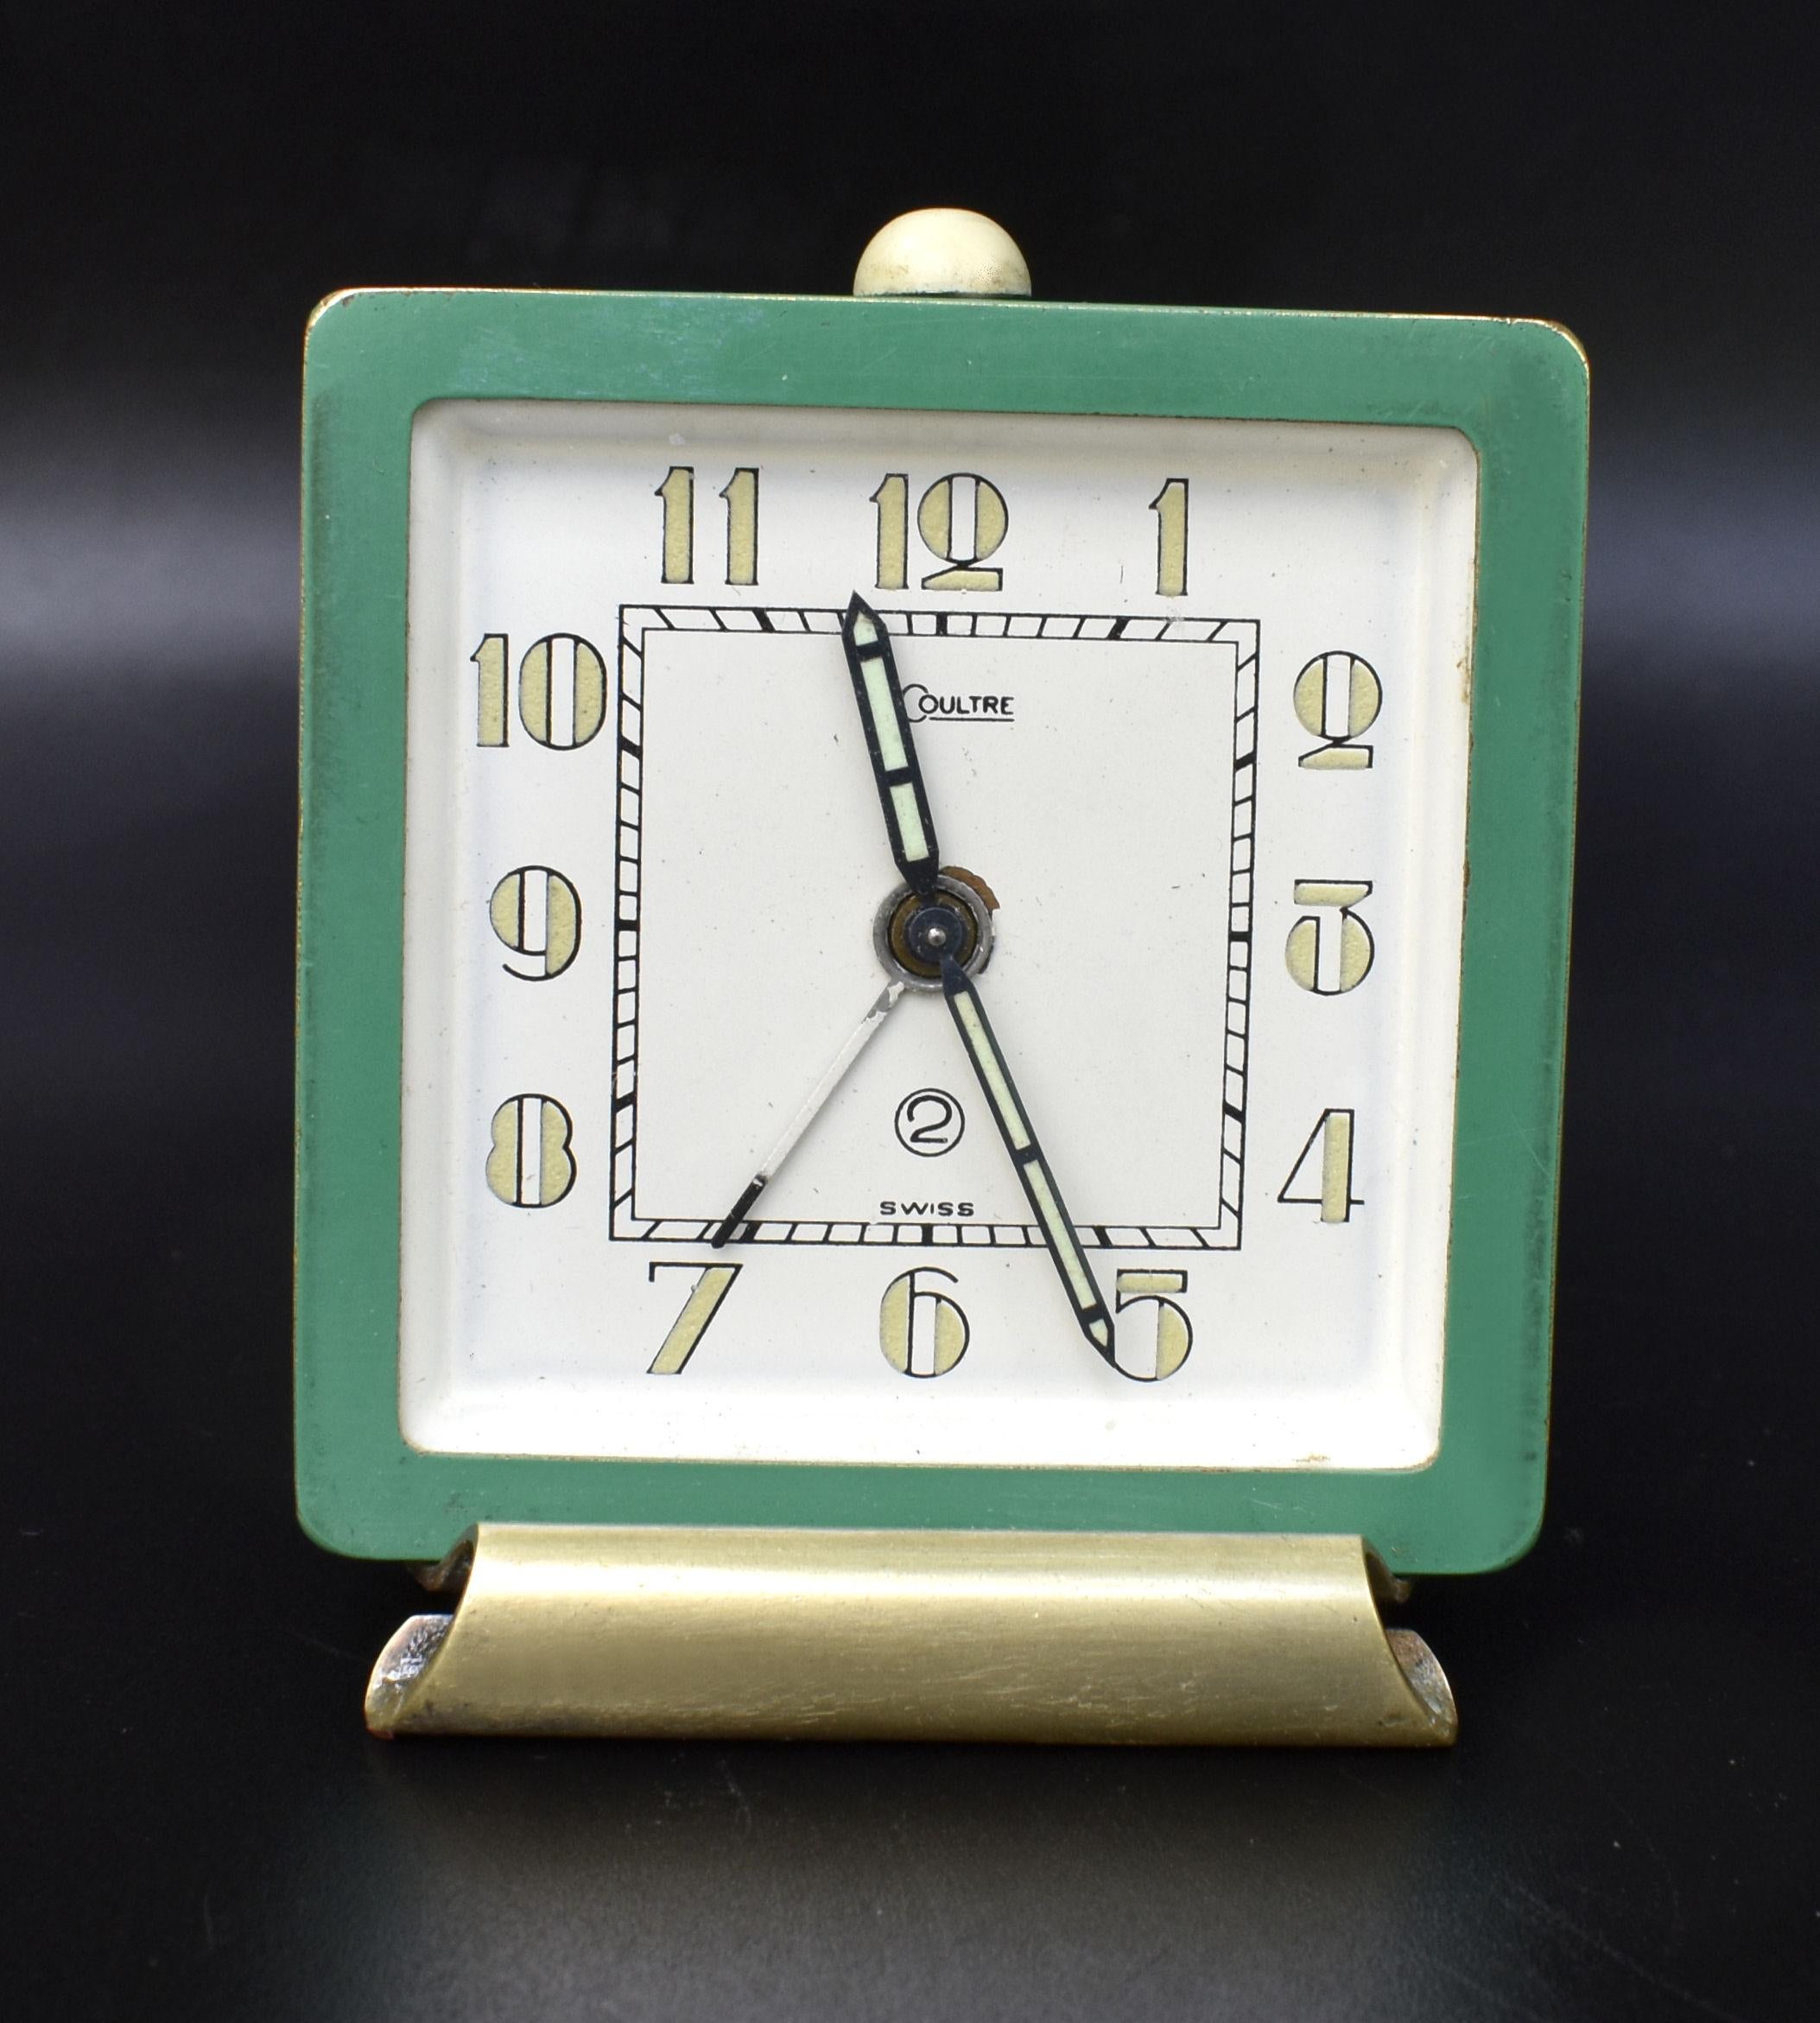 This is for a beautiful original and extremely stylish art deco desktop alarm clock made by Jaeger LeCoultre. It dates to the 30s, it has a 2 day movement and it has a green enamel body with a gilded stand and stylised art deco numerals. The face is